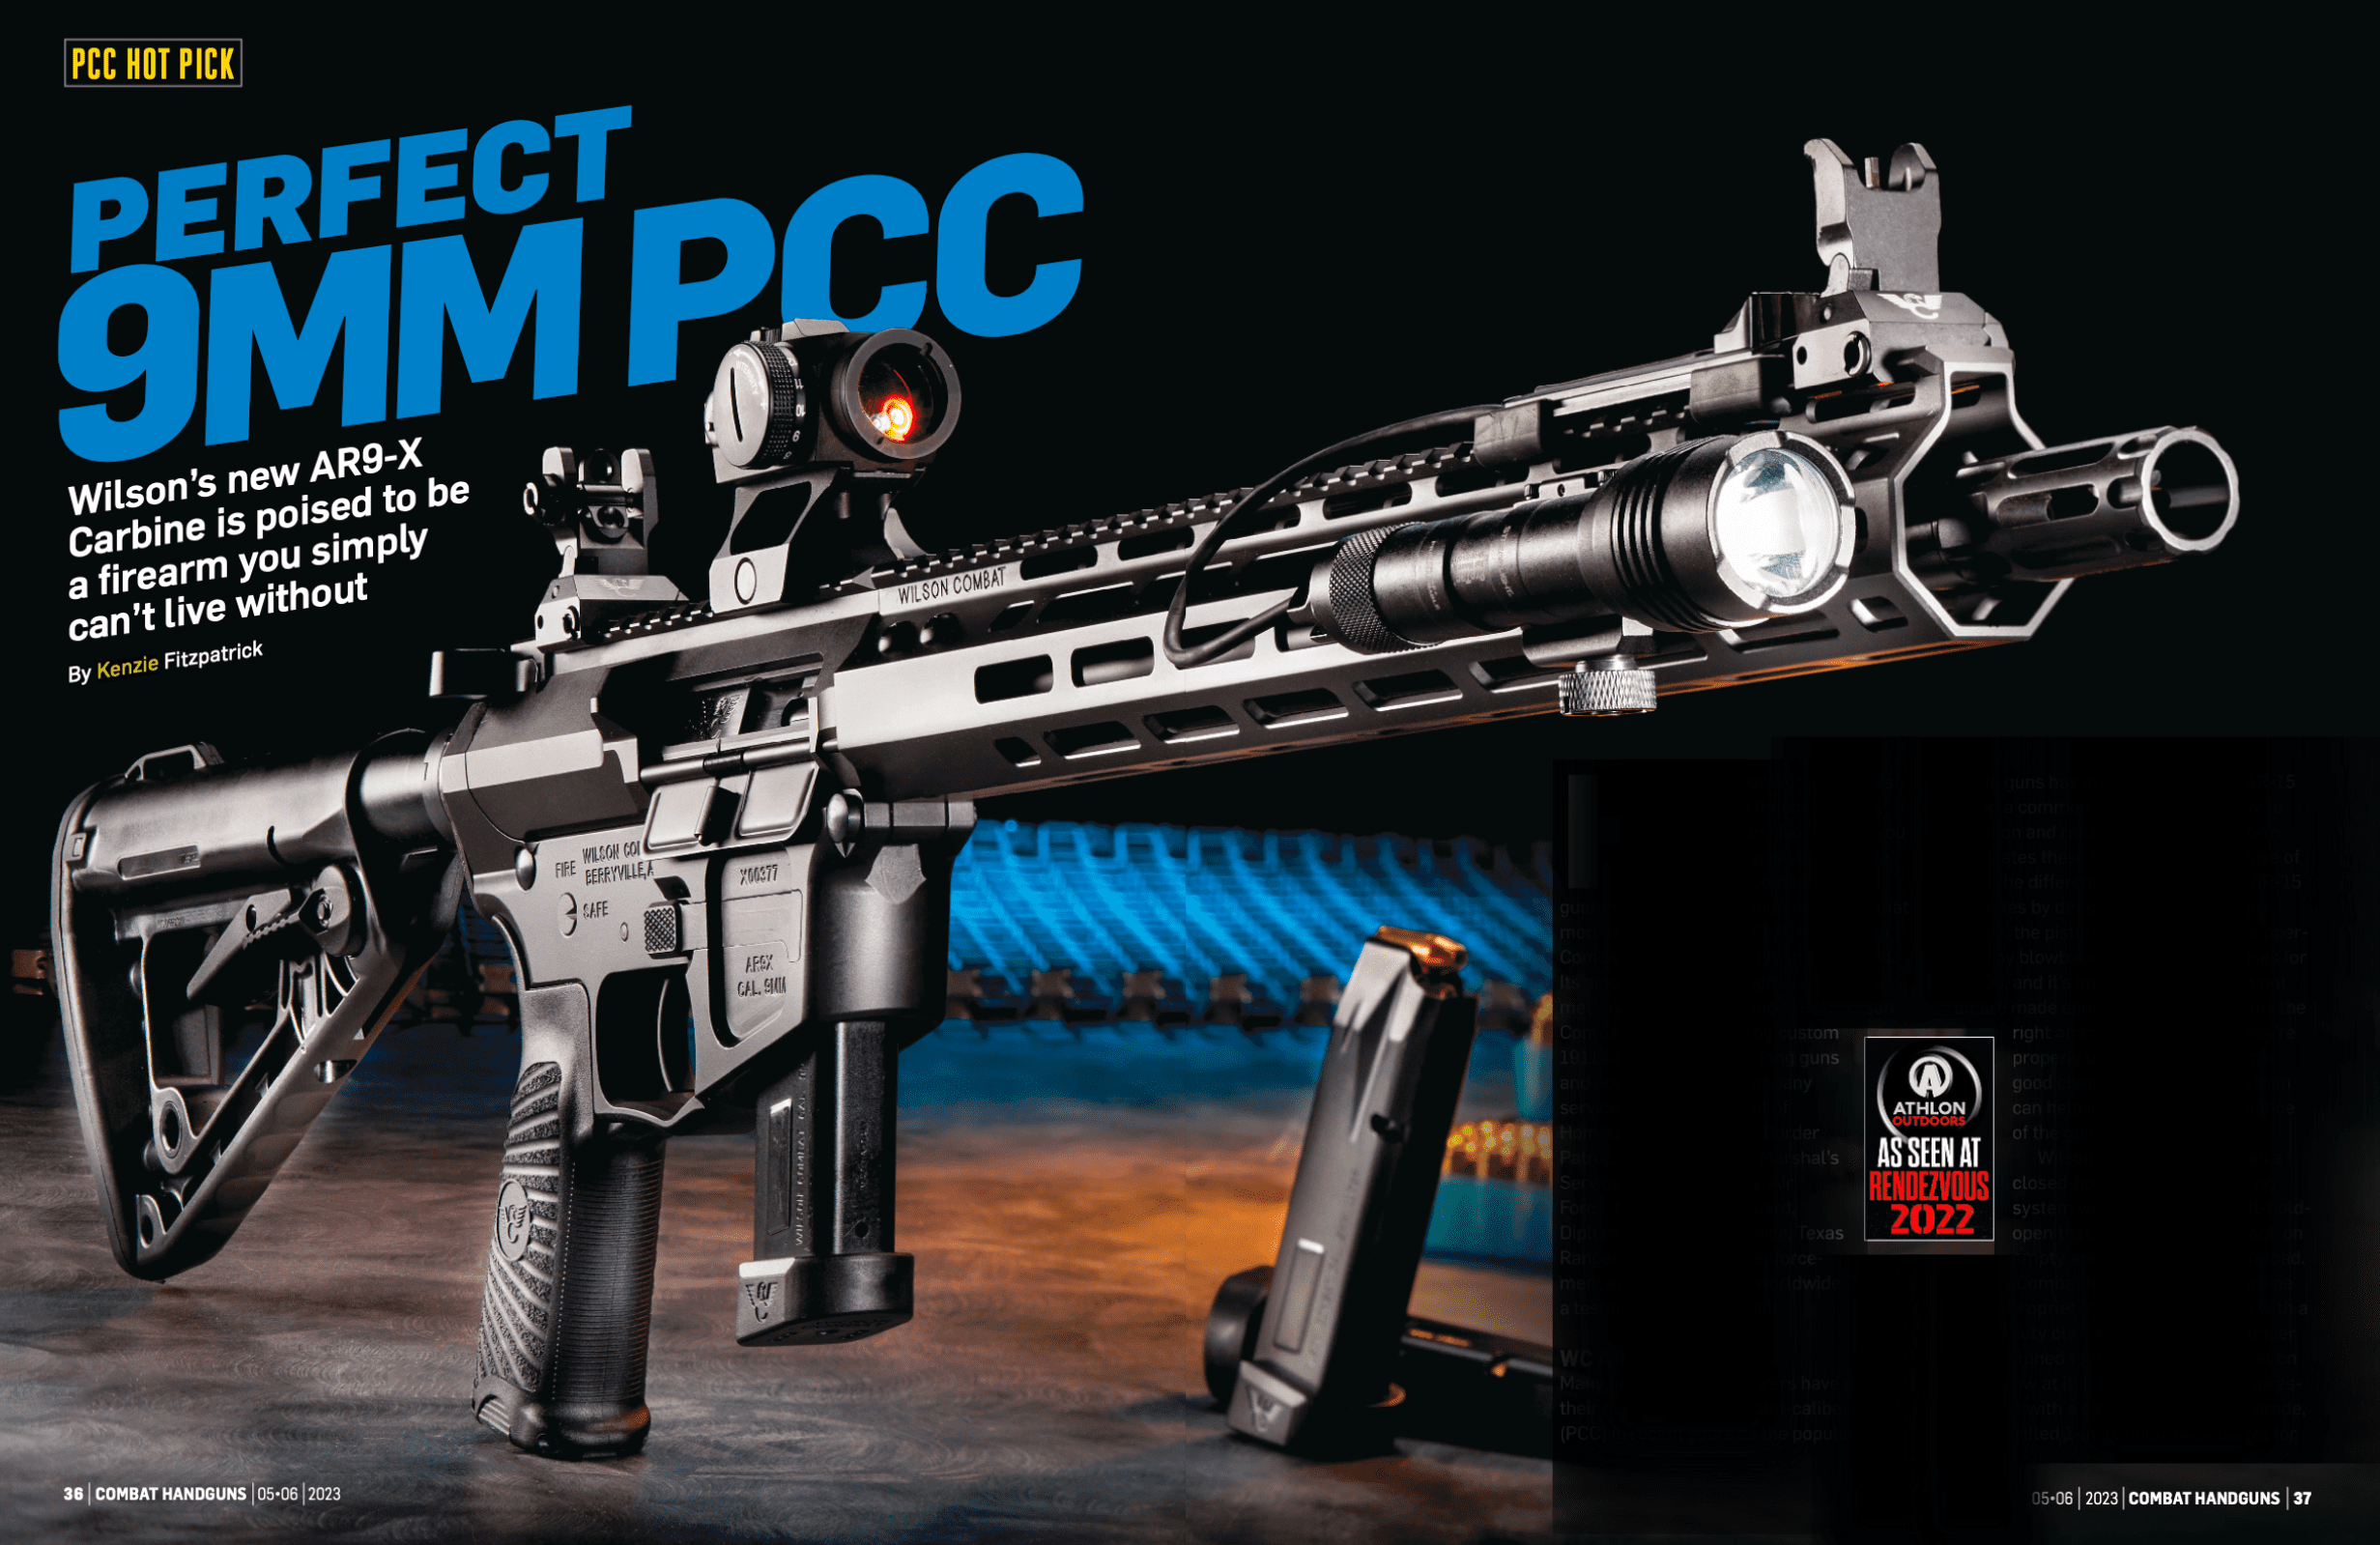 Perfect 9mm PCC: Wilson’s new AR9-X Carbine is poised to be a firearm you simply can’t live without